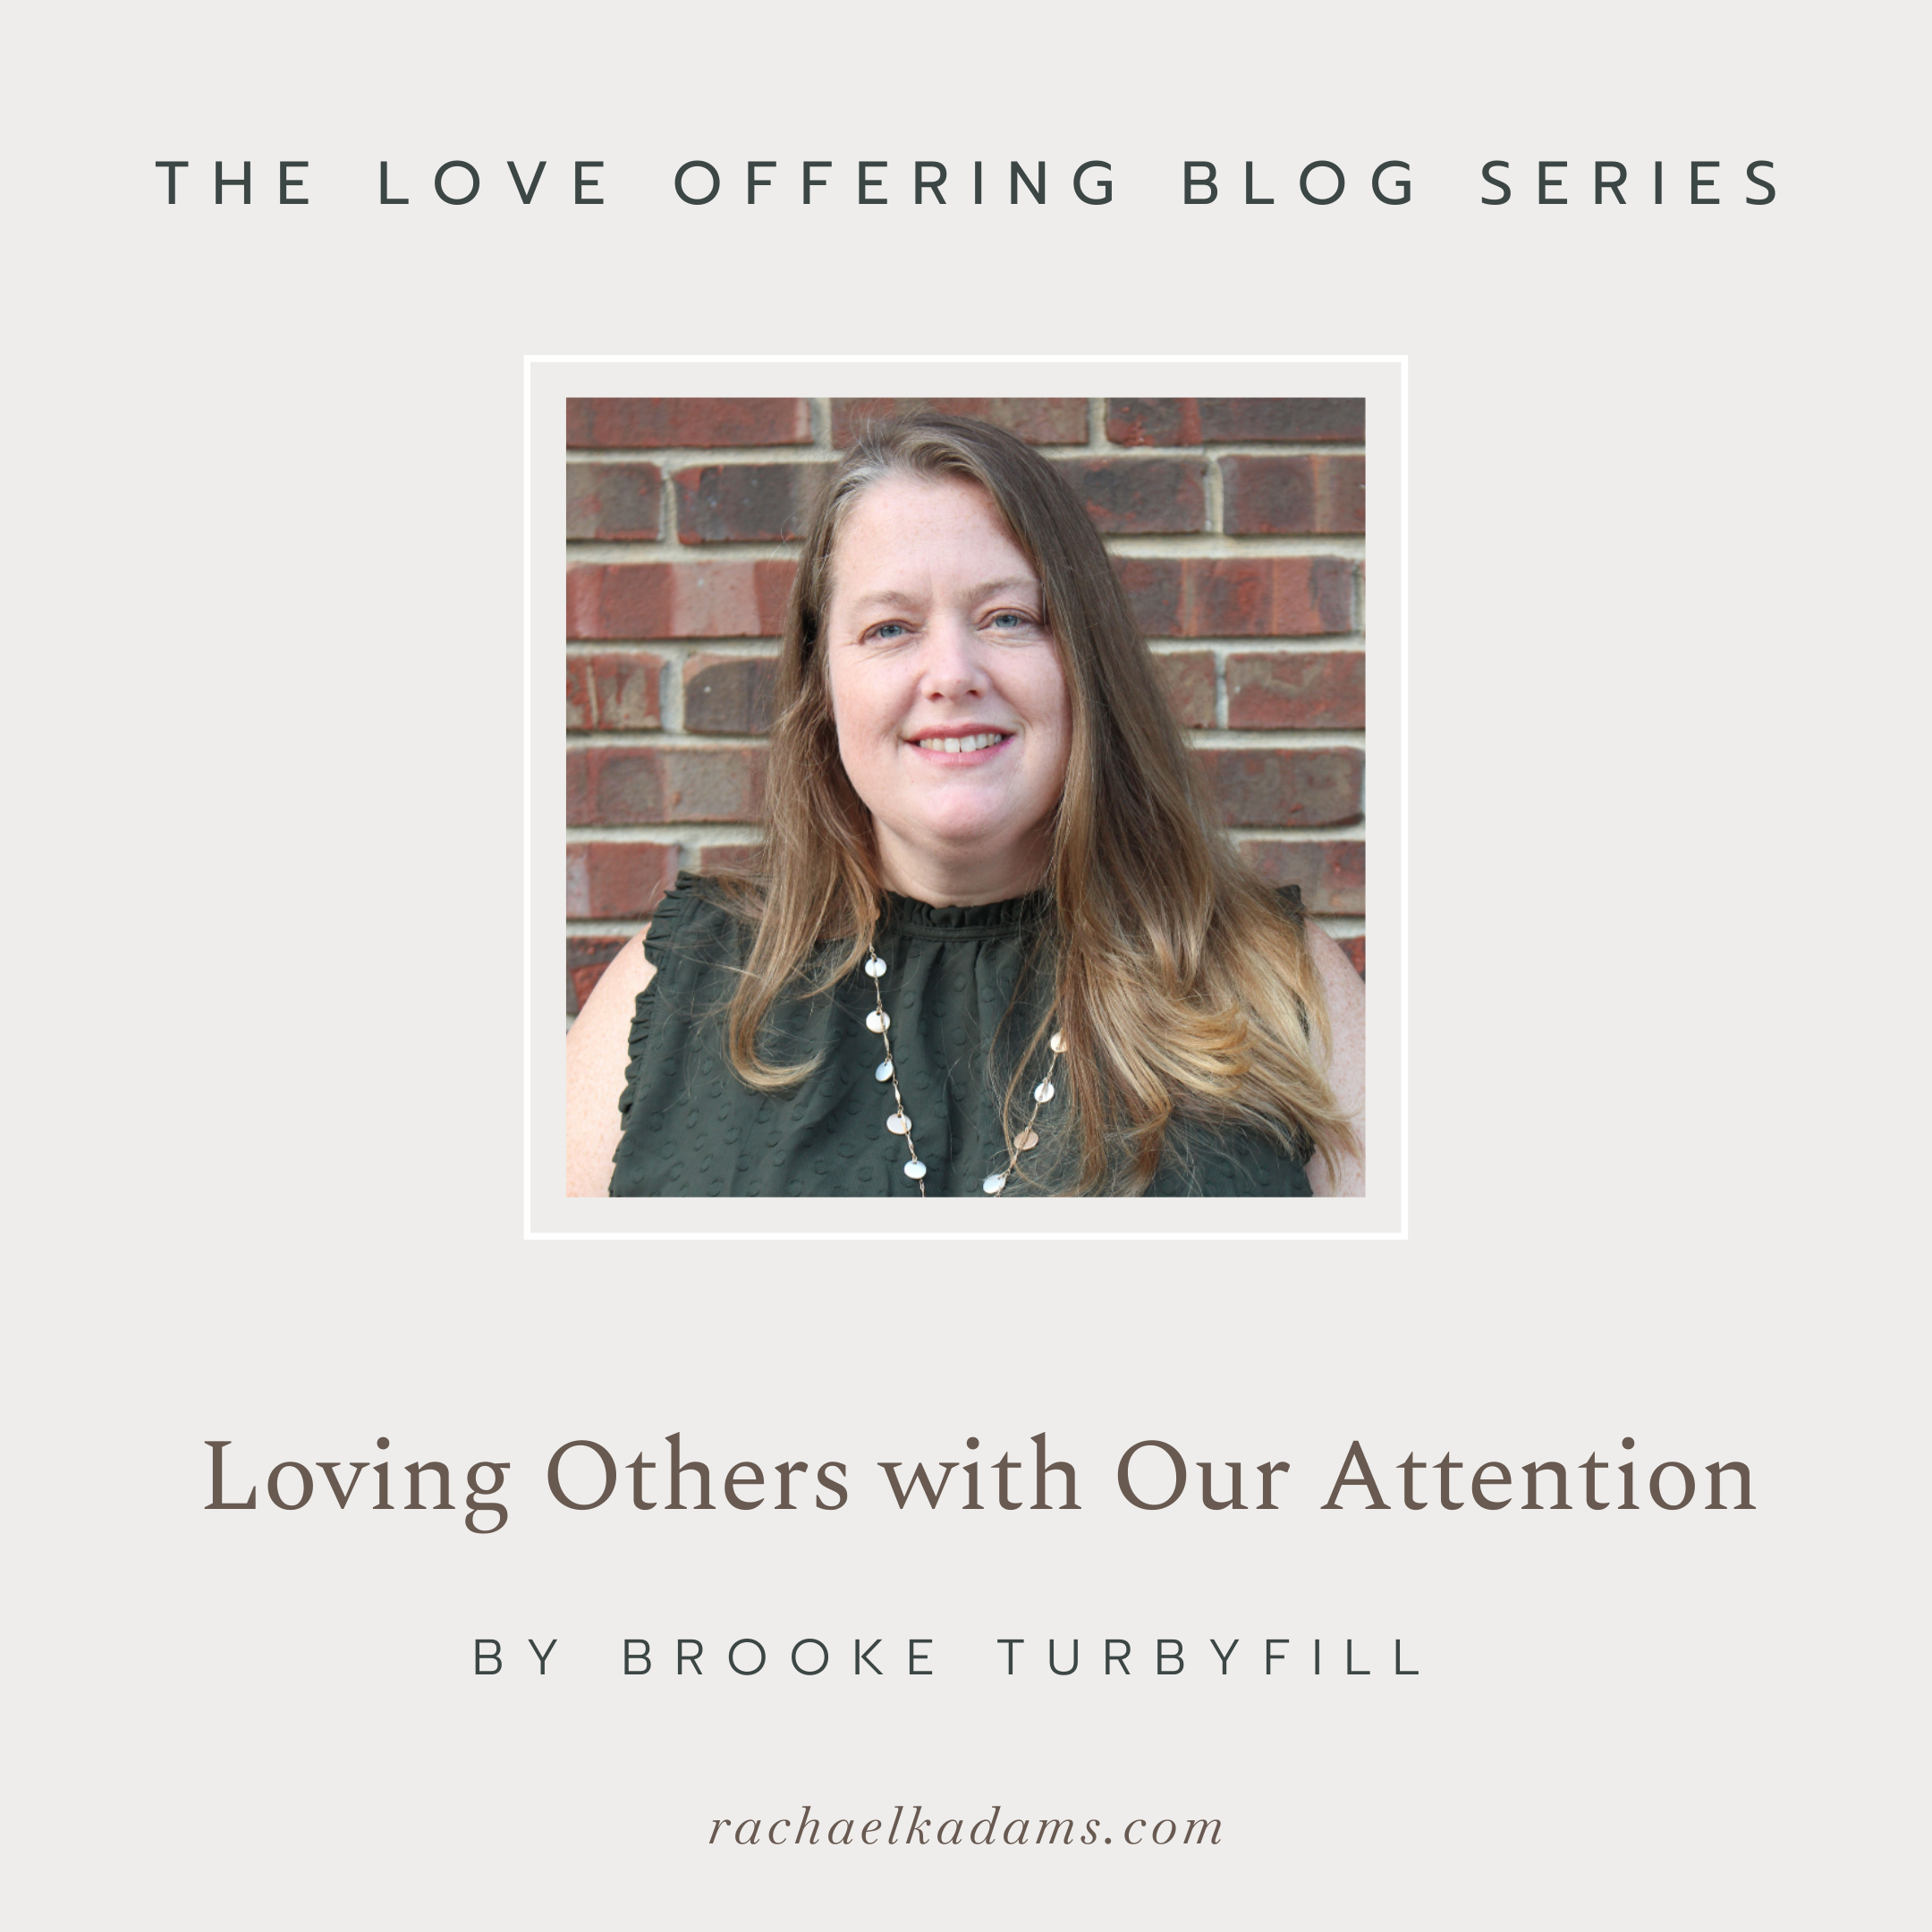 Loving Others with Our Attention by Brooke Turbyfill